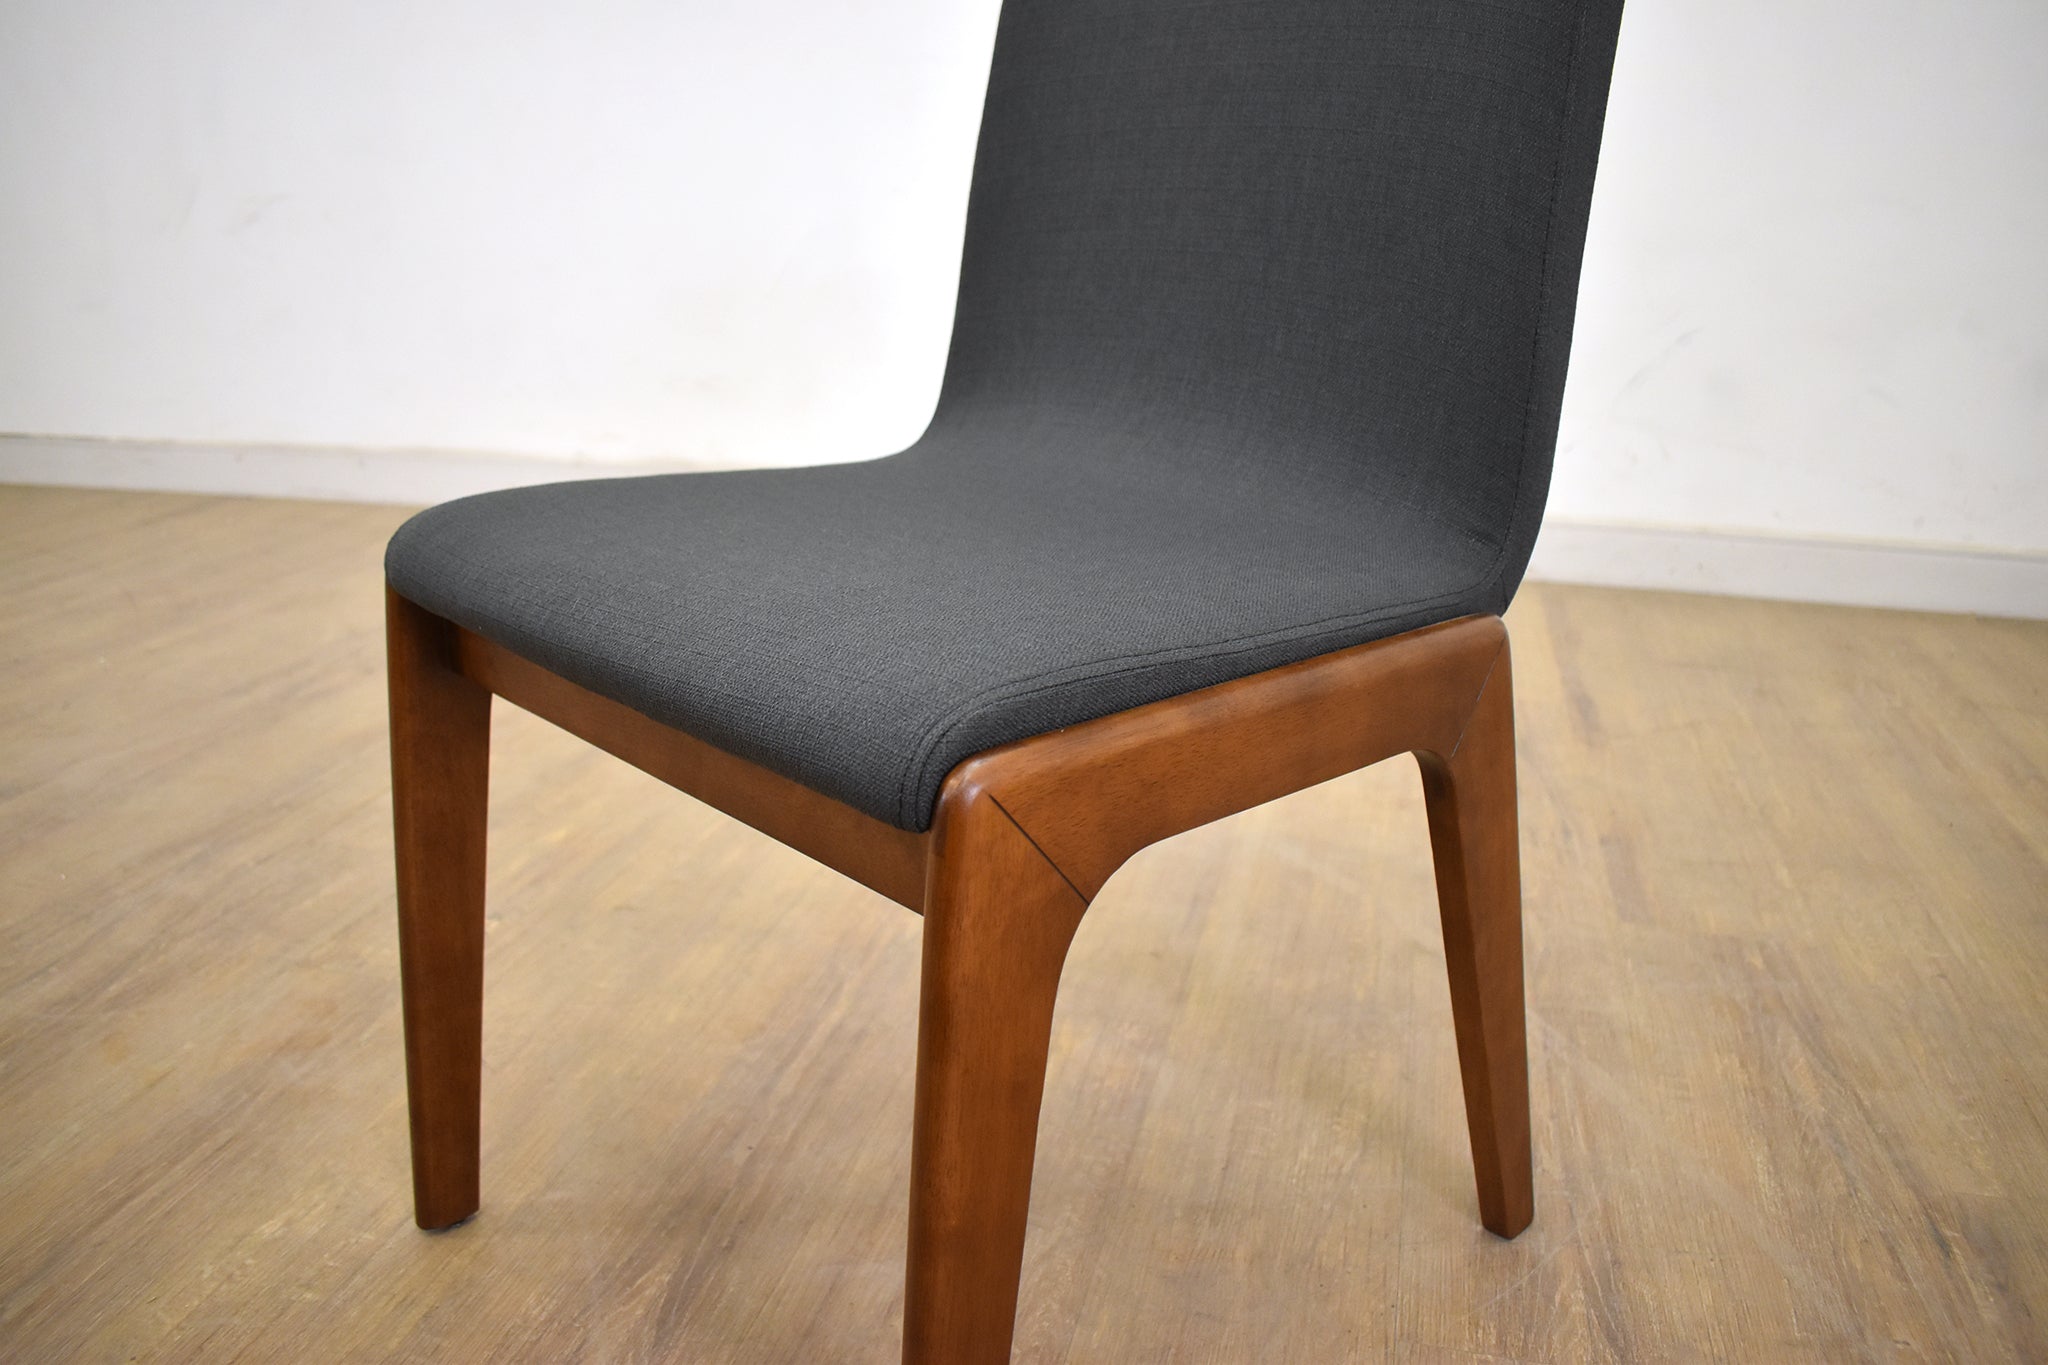 NORTH DELTA DINING CHAIRS